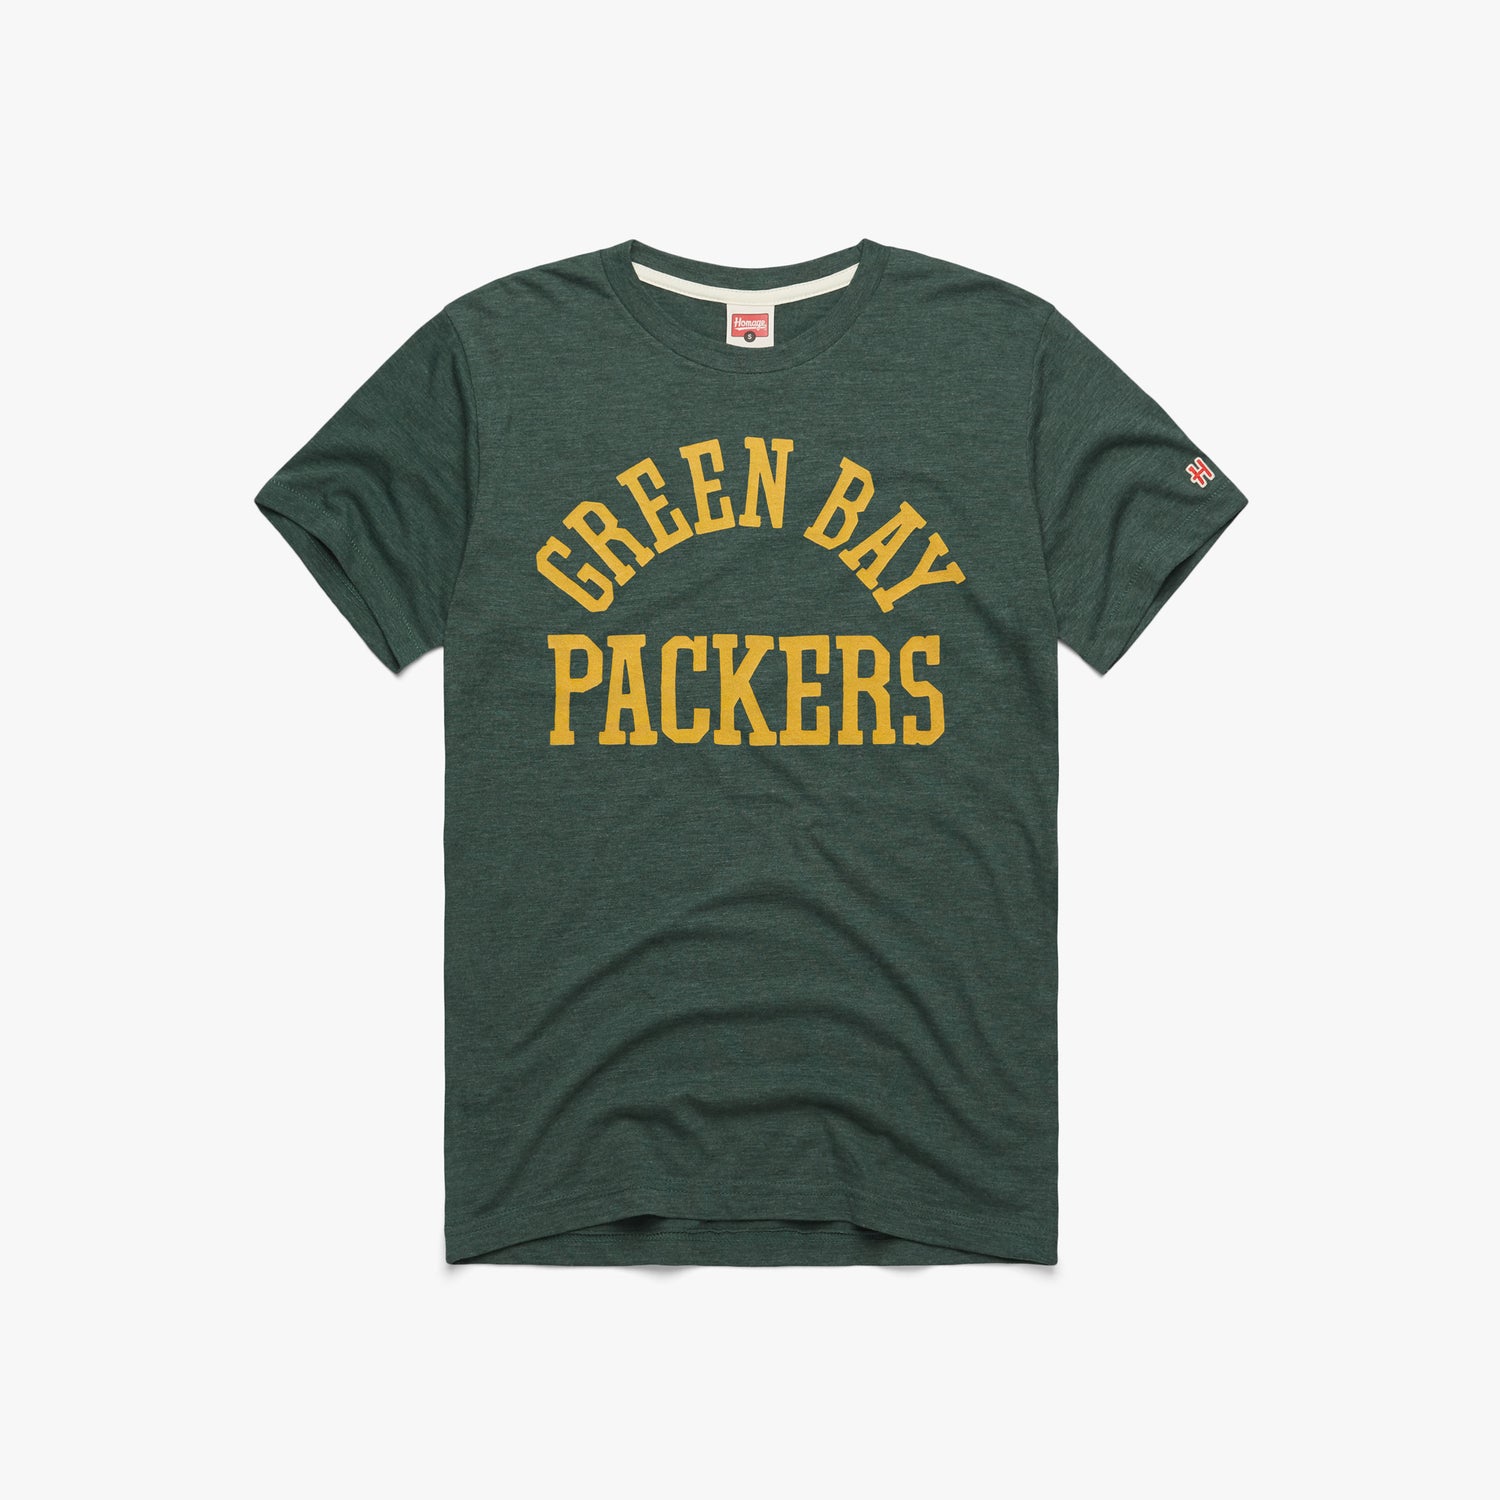 Green Bay Packers Classic T-Shirt from Homage. | Officially Licensed Vintage NFL Apparel from Homage Pro Shop.